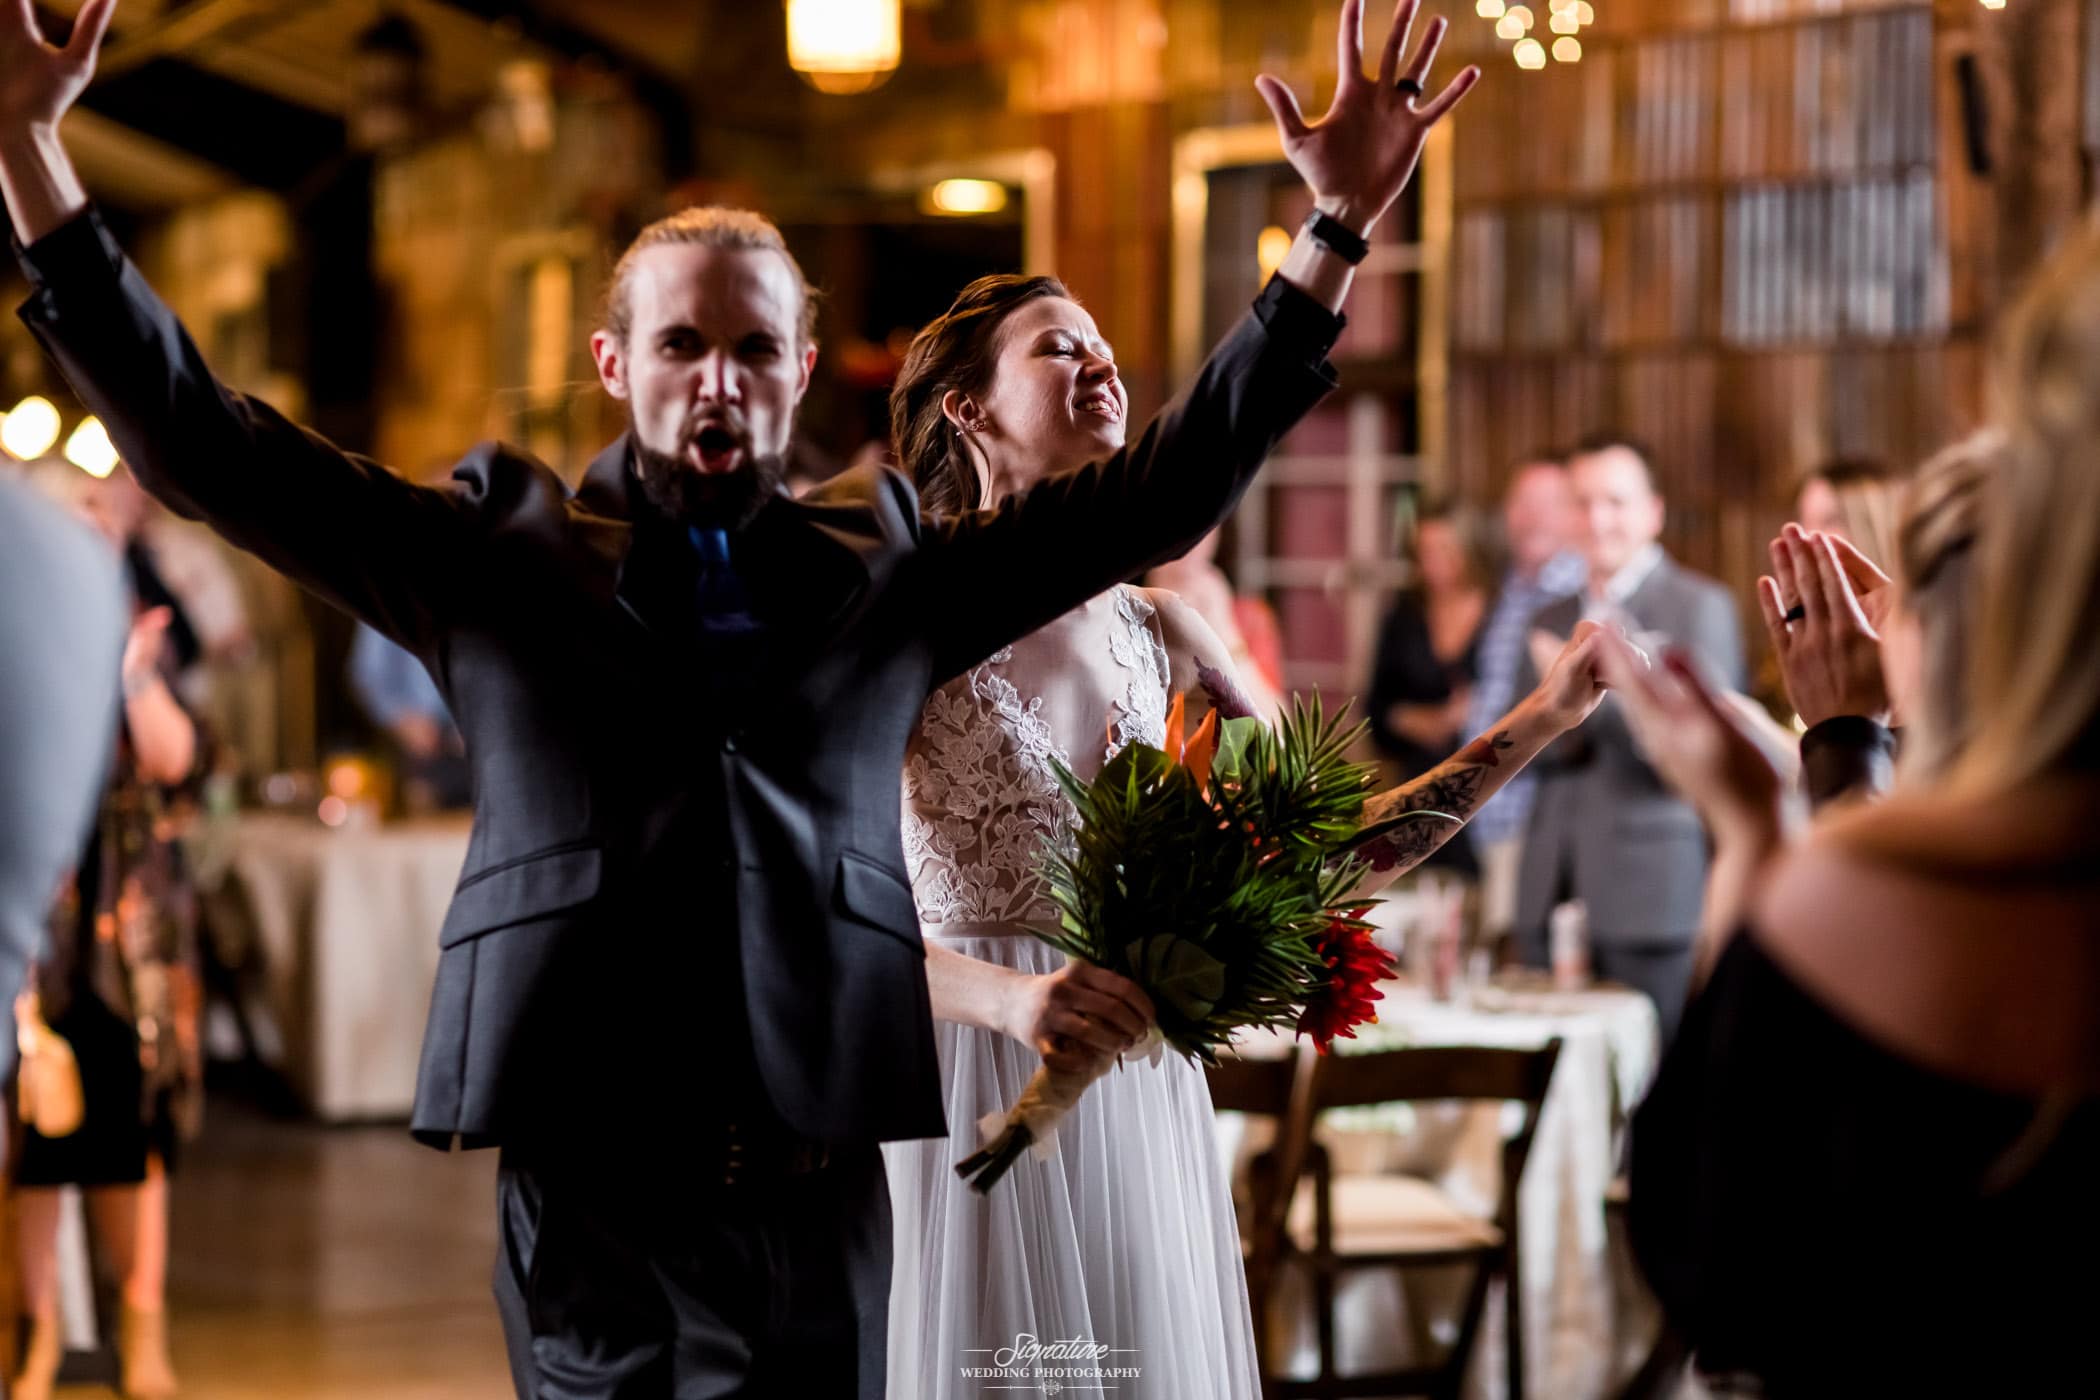 Groom with arms up and bride holding bouquet